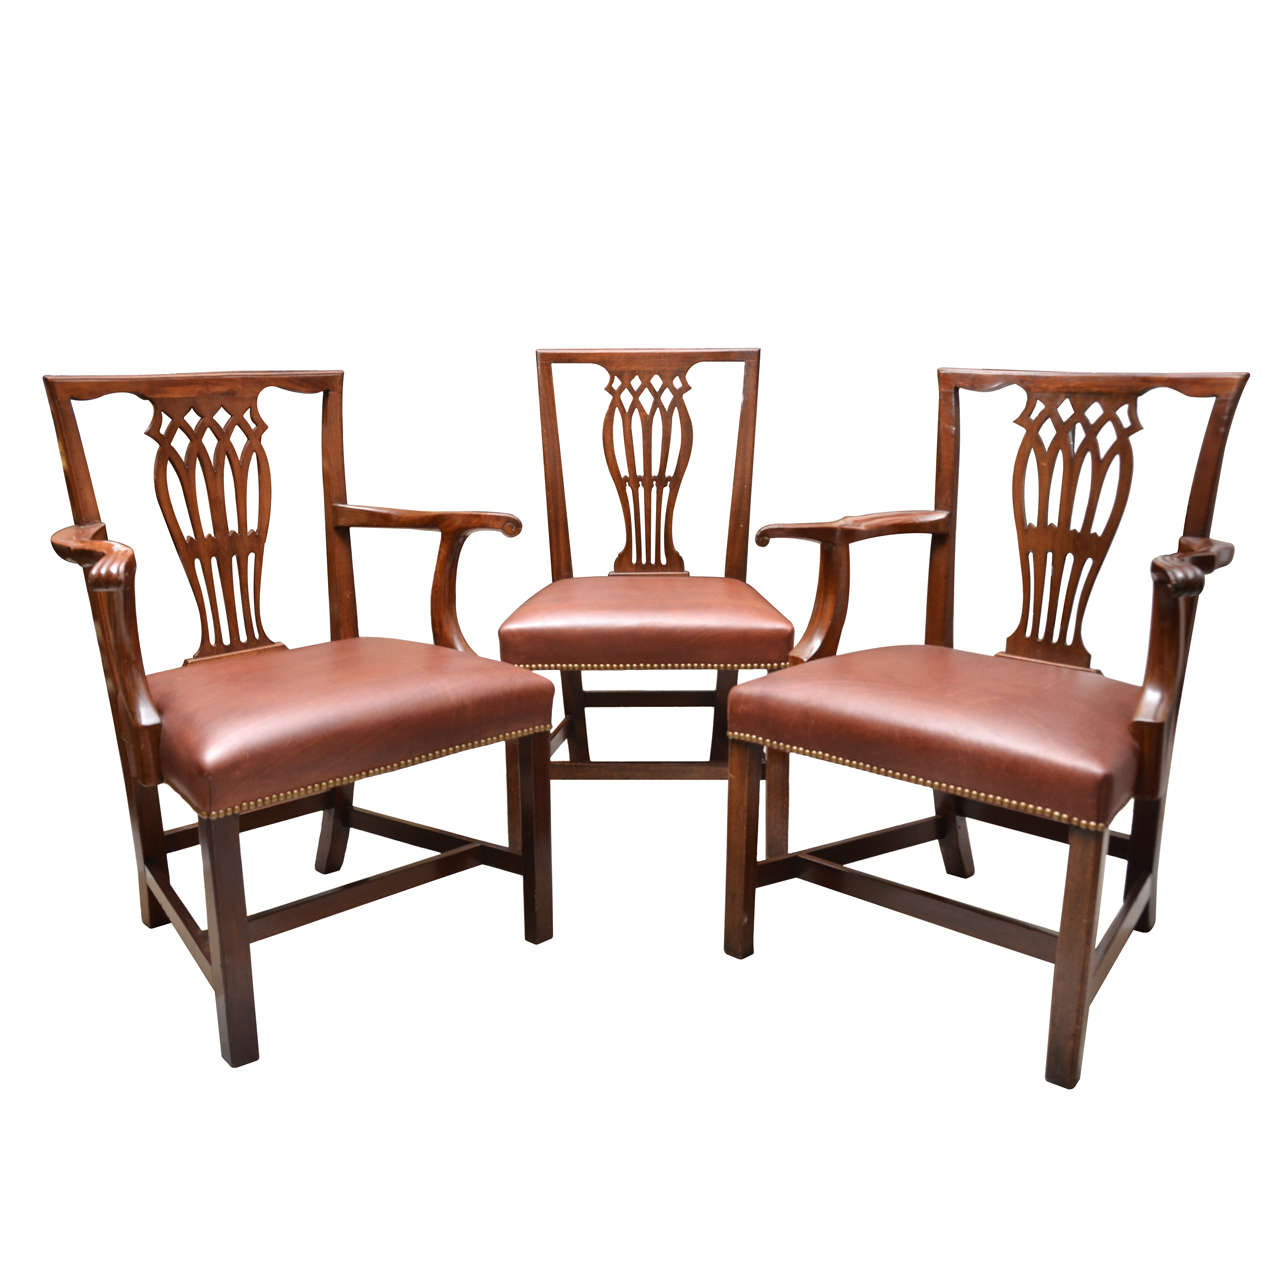 Late 18th-Early 19th Century English Set of 12 Mahogany Dining Chairs For Sale